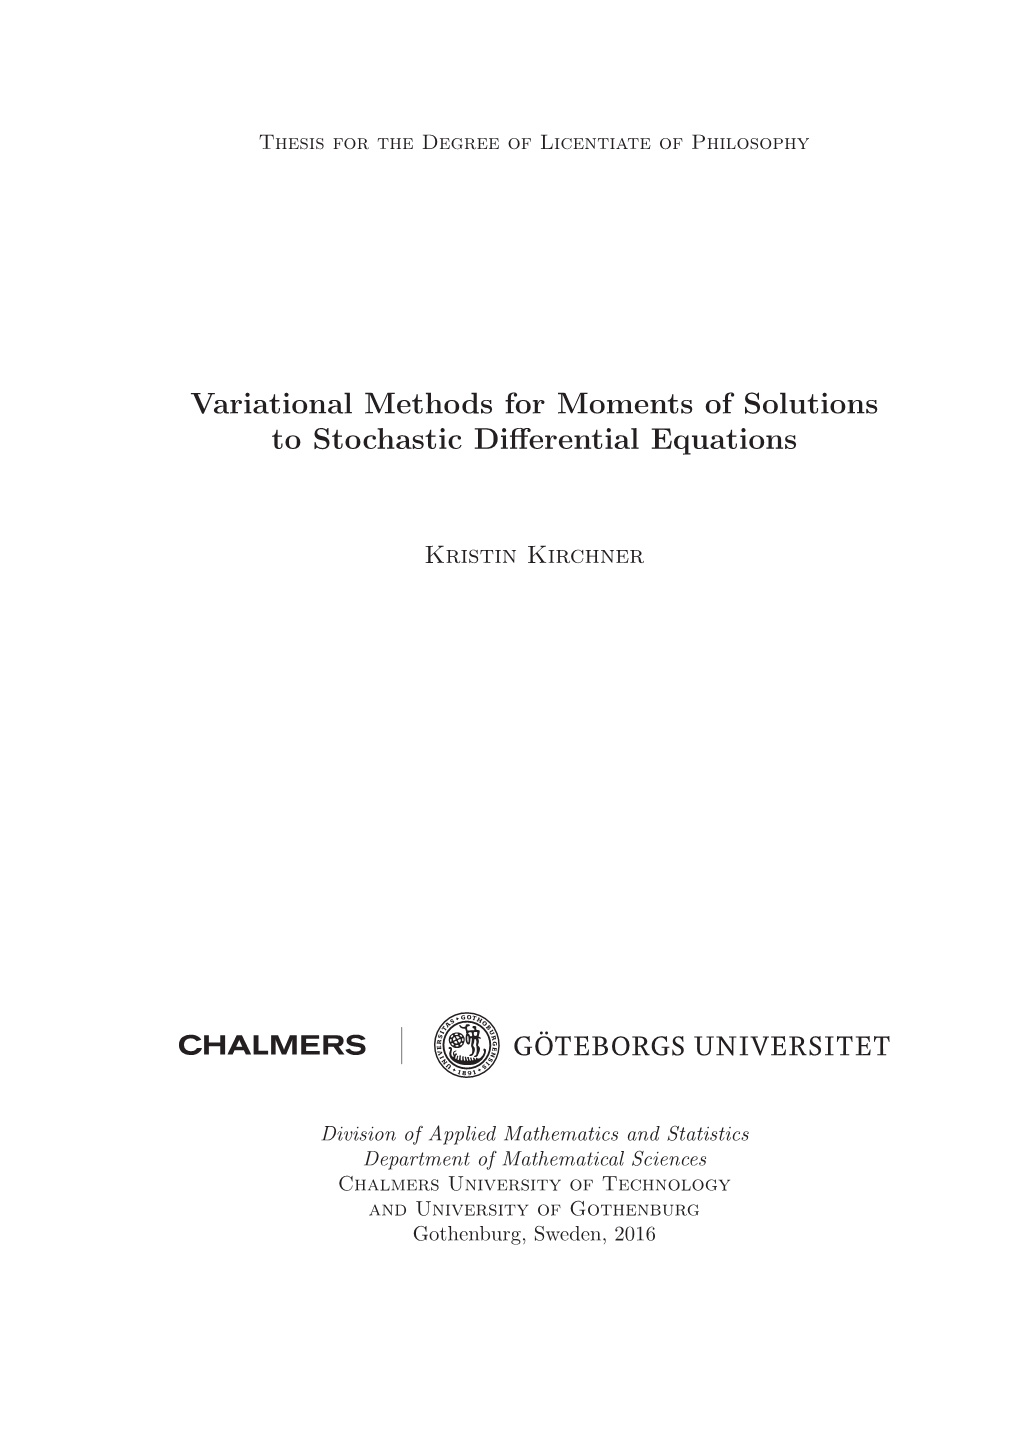 Variational Methods for Moments of Solutions to Stochastic Differential